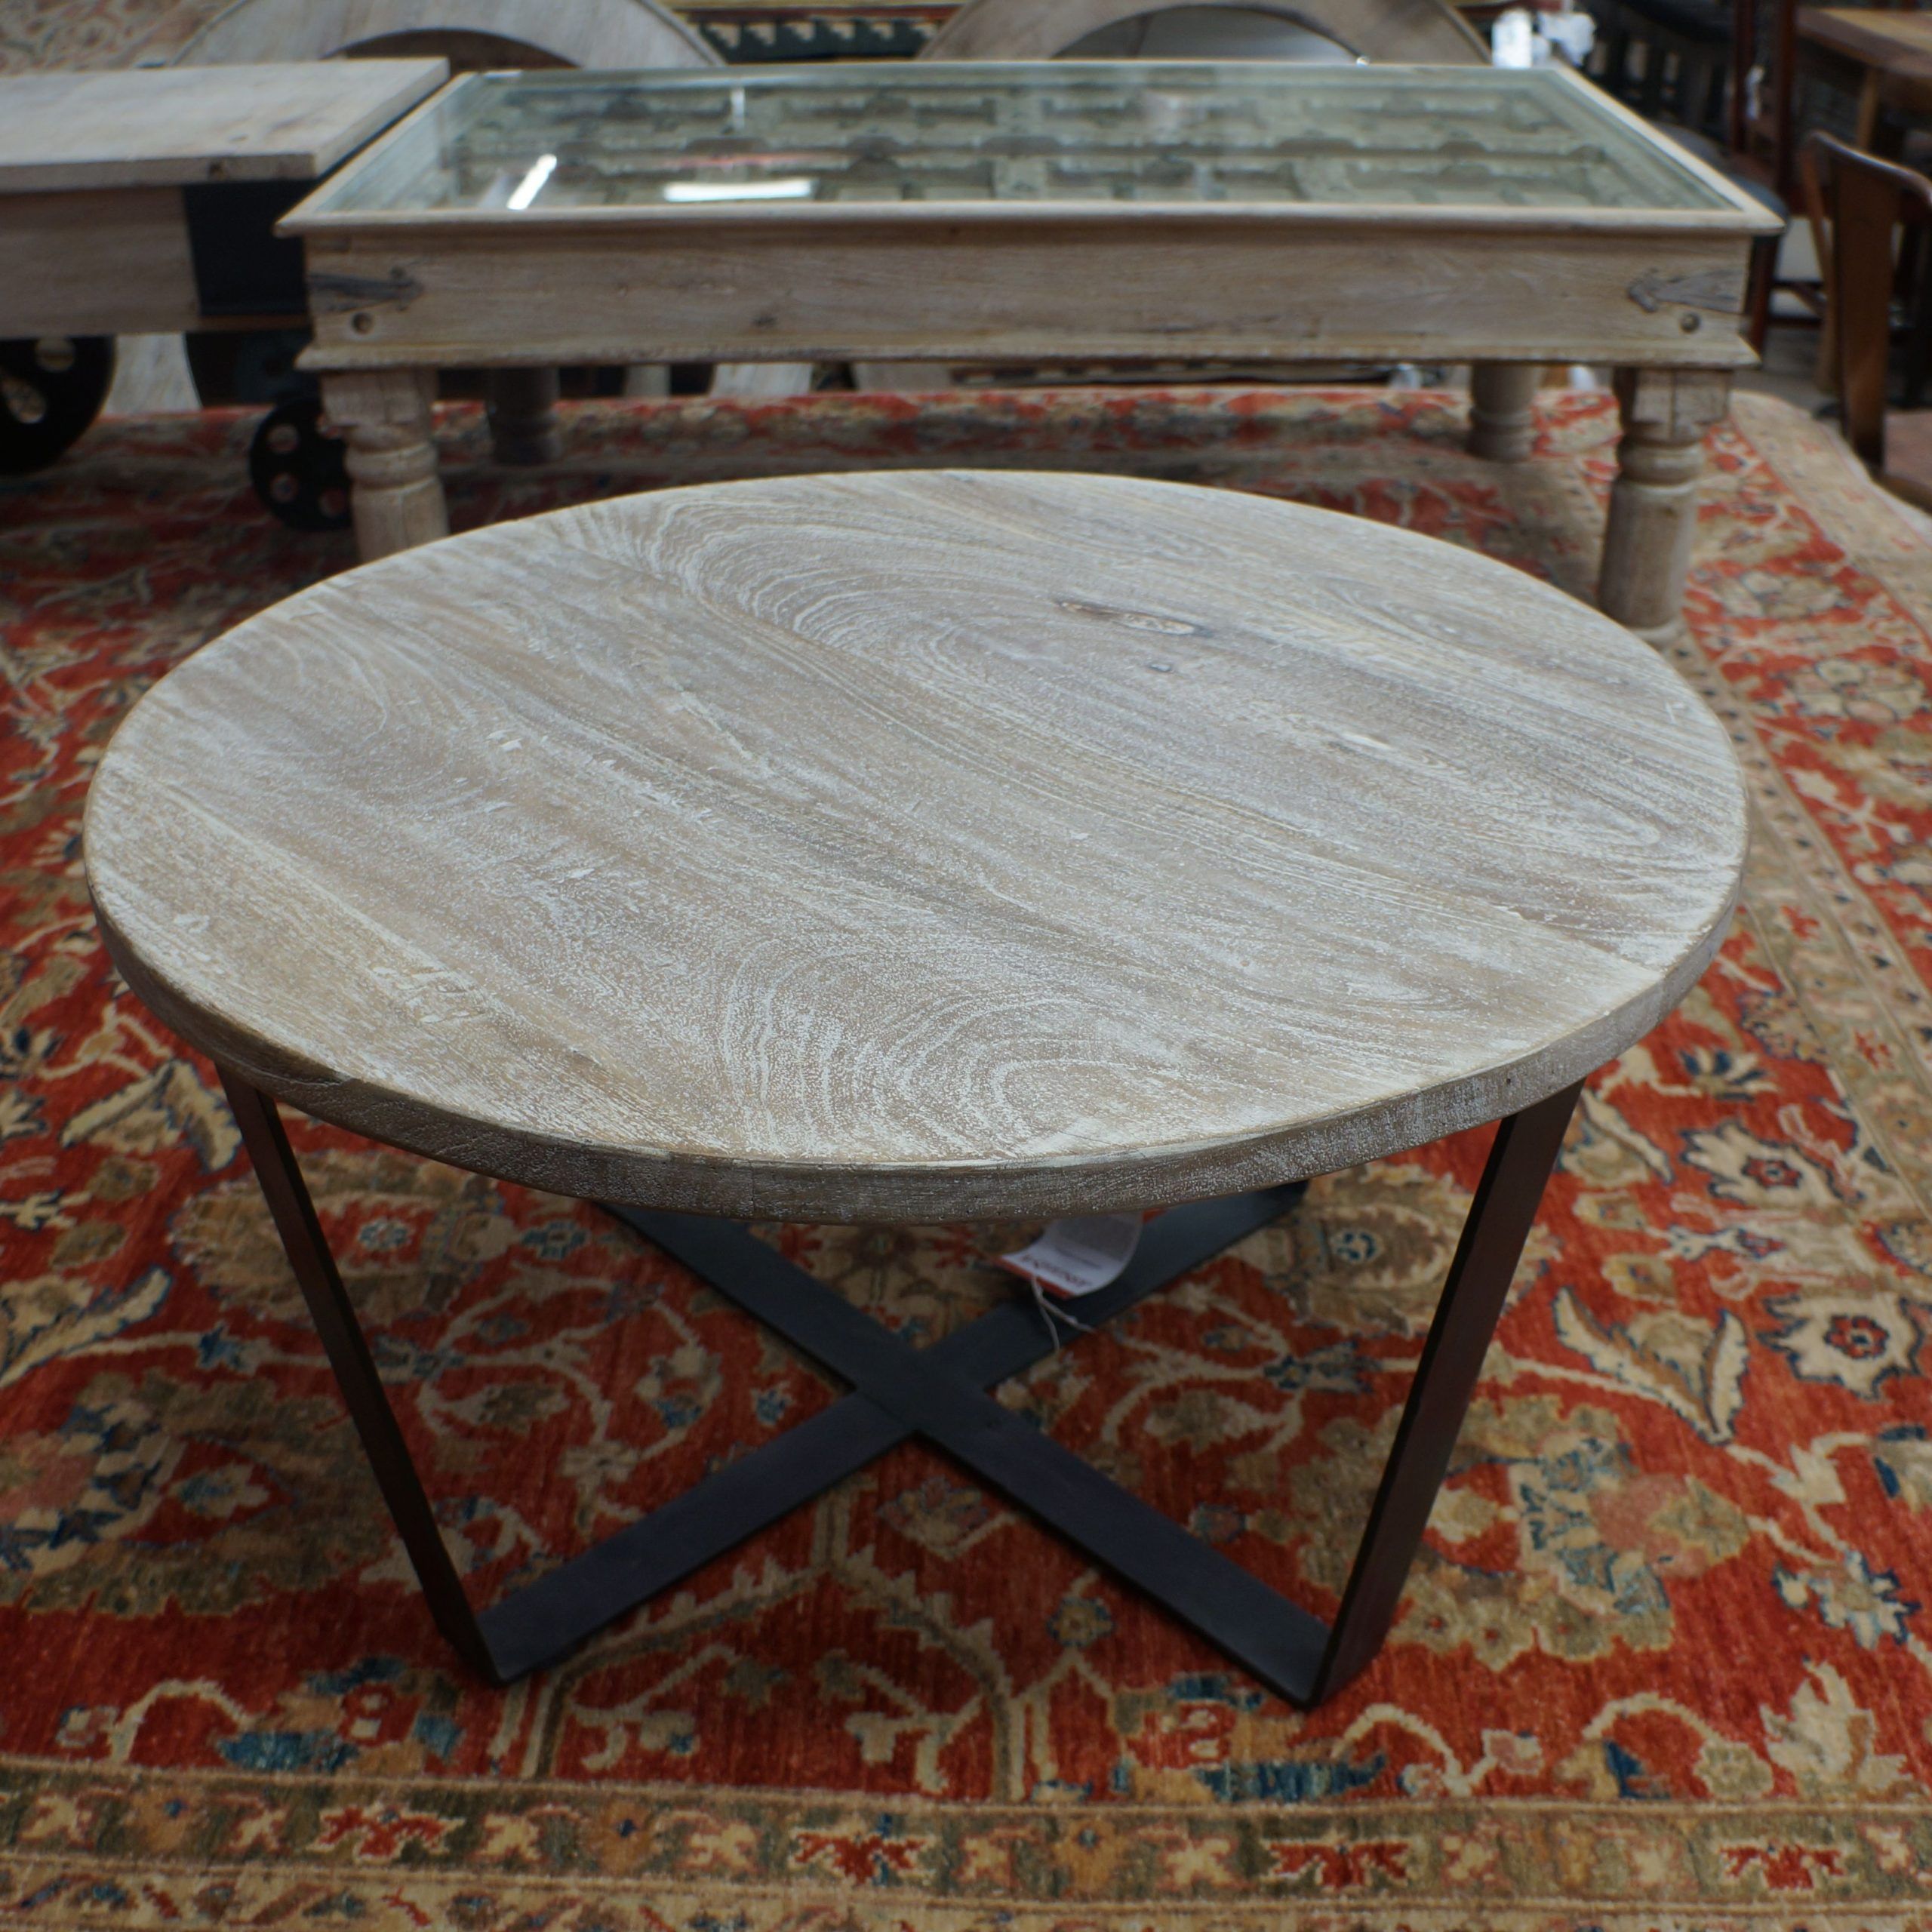 Famous Aged Black Iron Coffee Tables With Round Real Wood Coffee Table With An Black Iron Base And A (View 12 of 20)